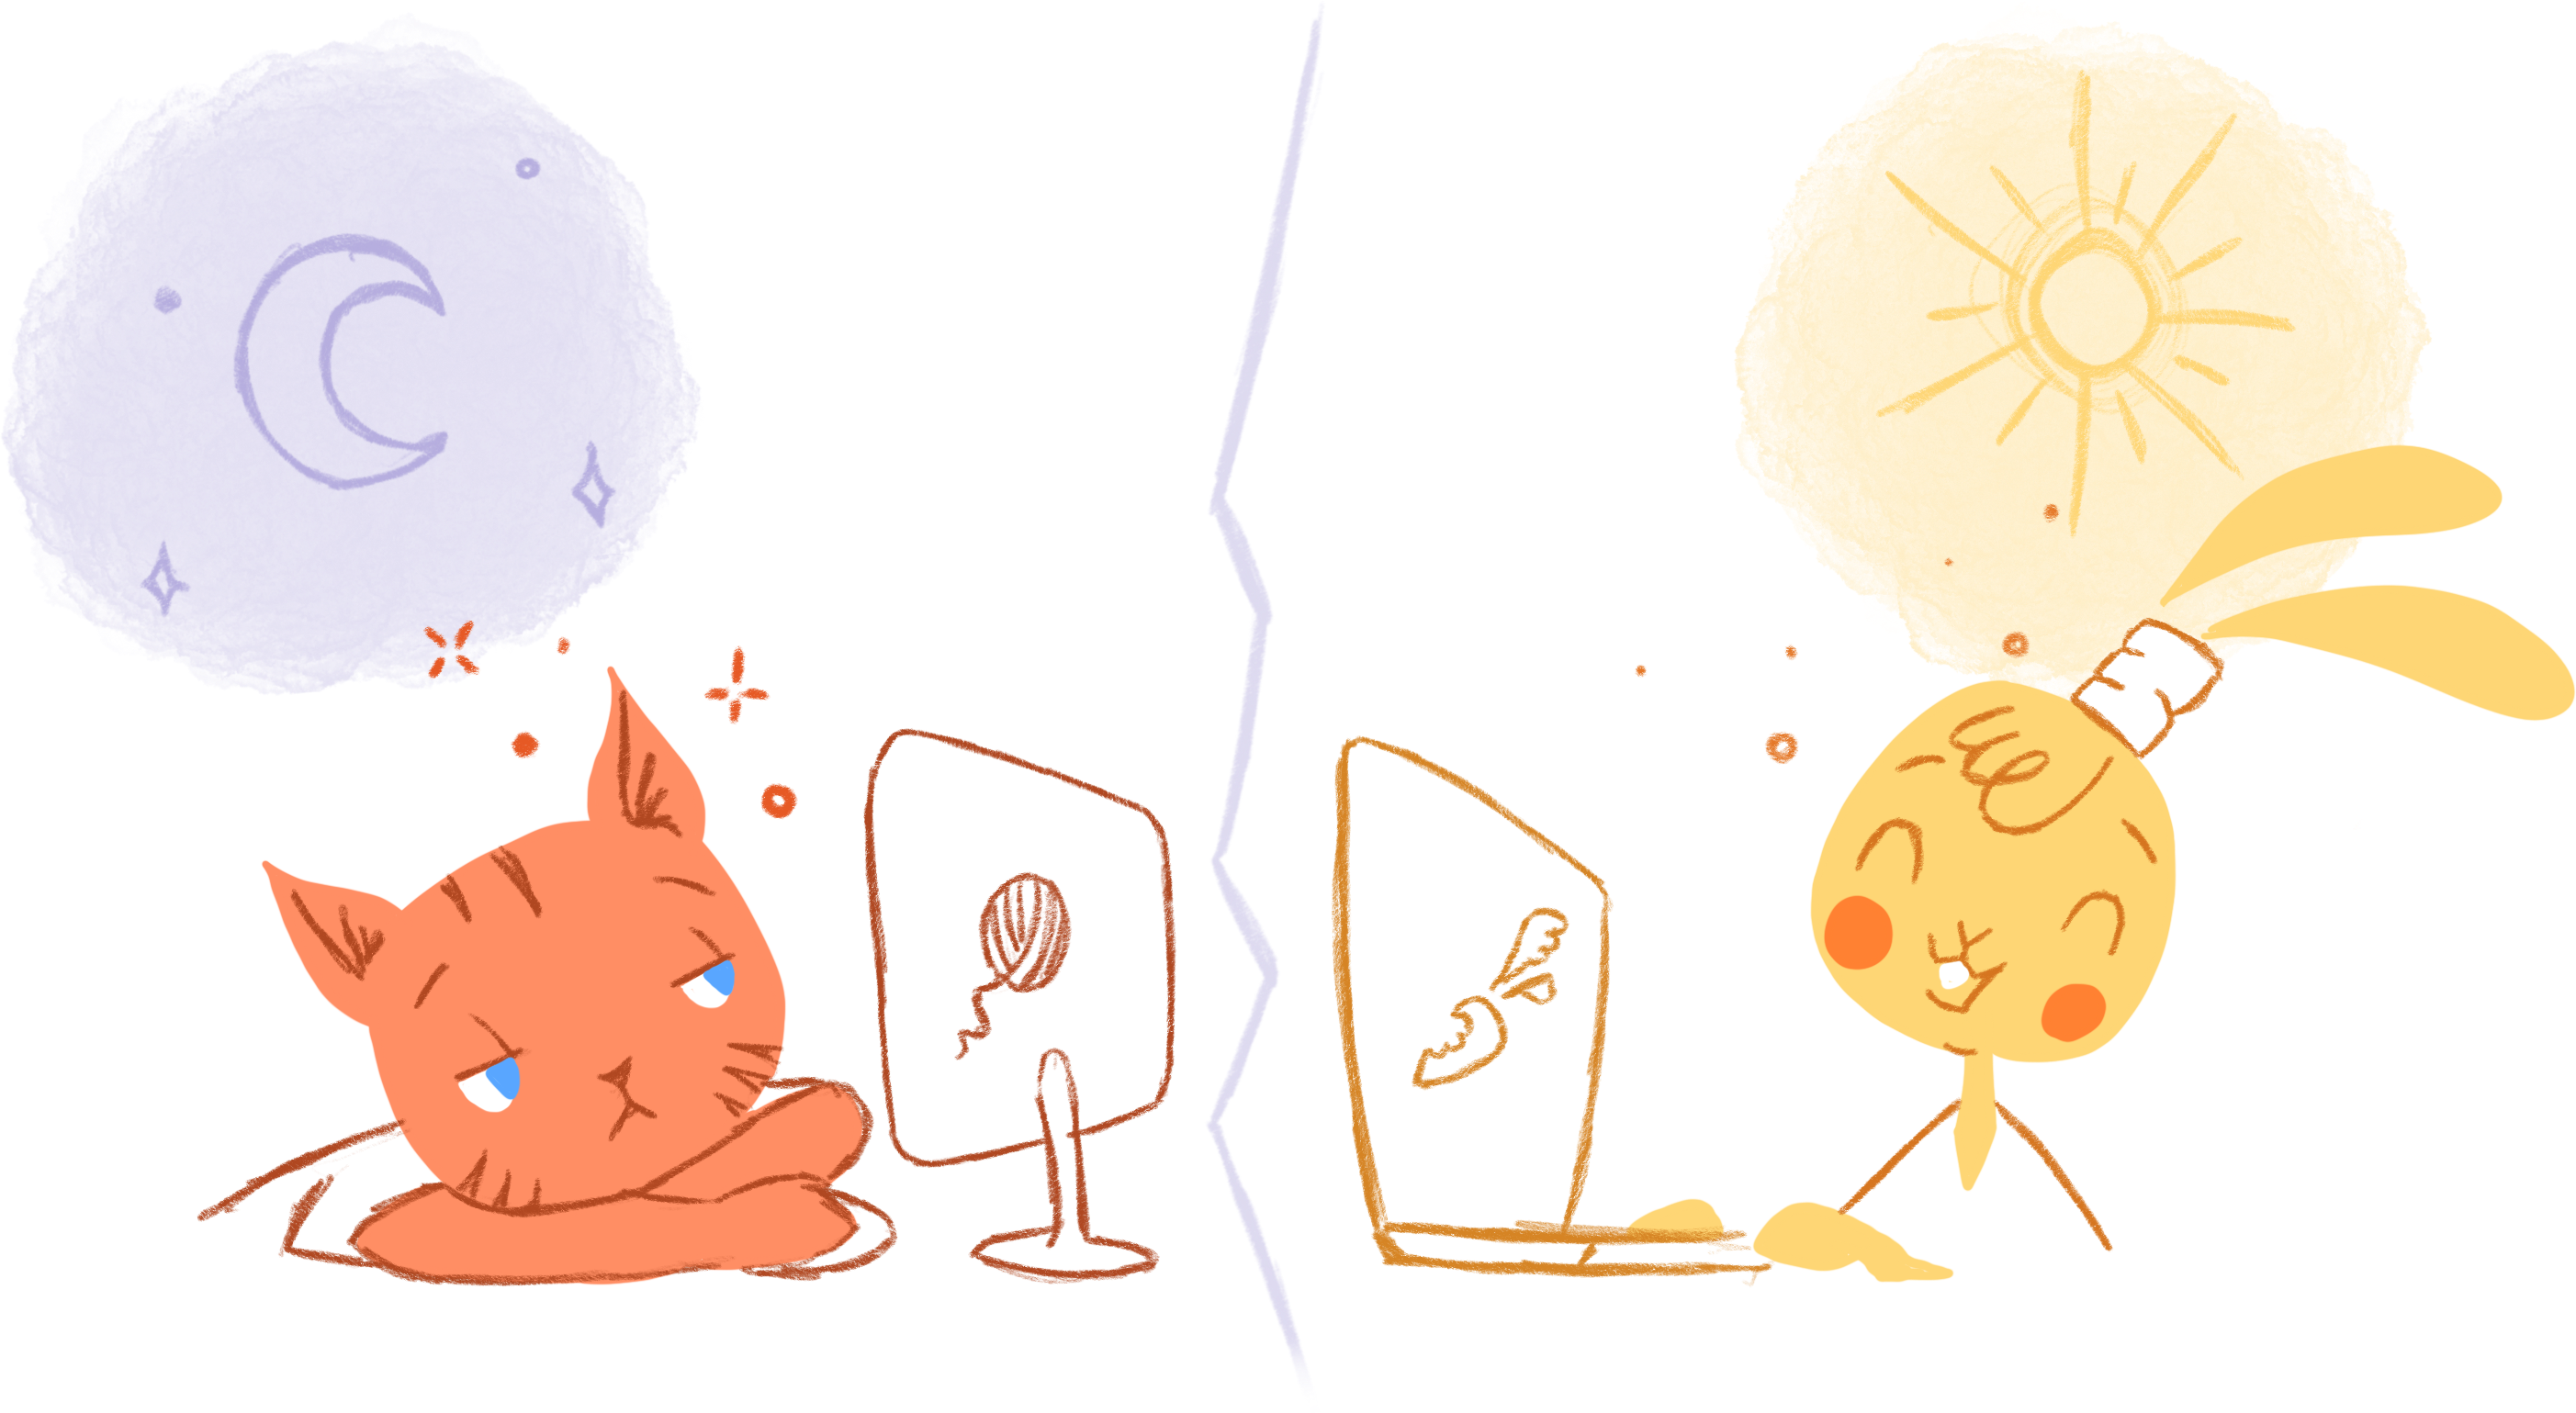 Morning clipart early riser. Productivity archives page of